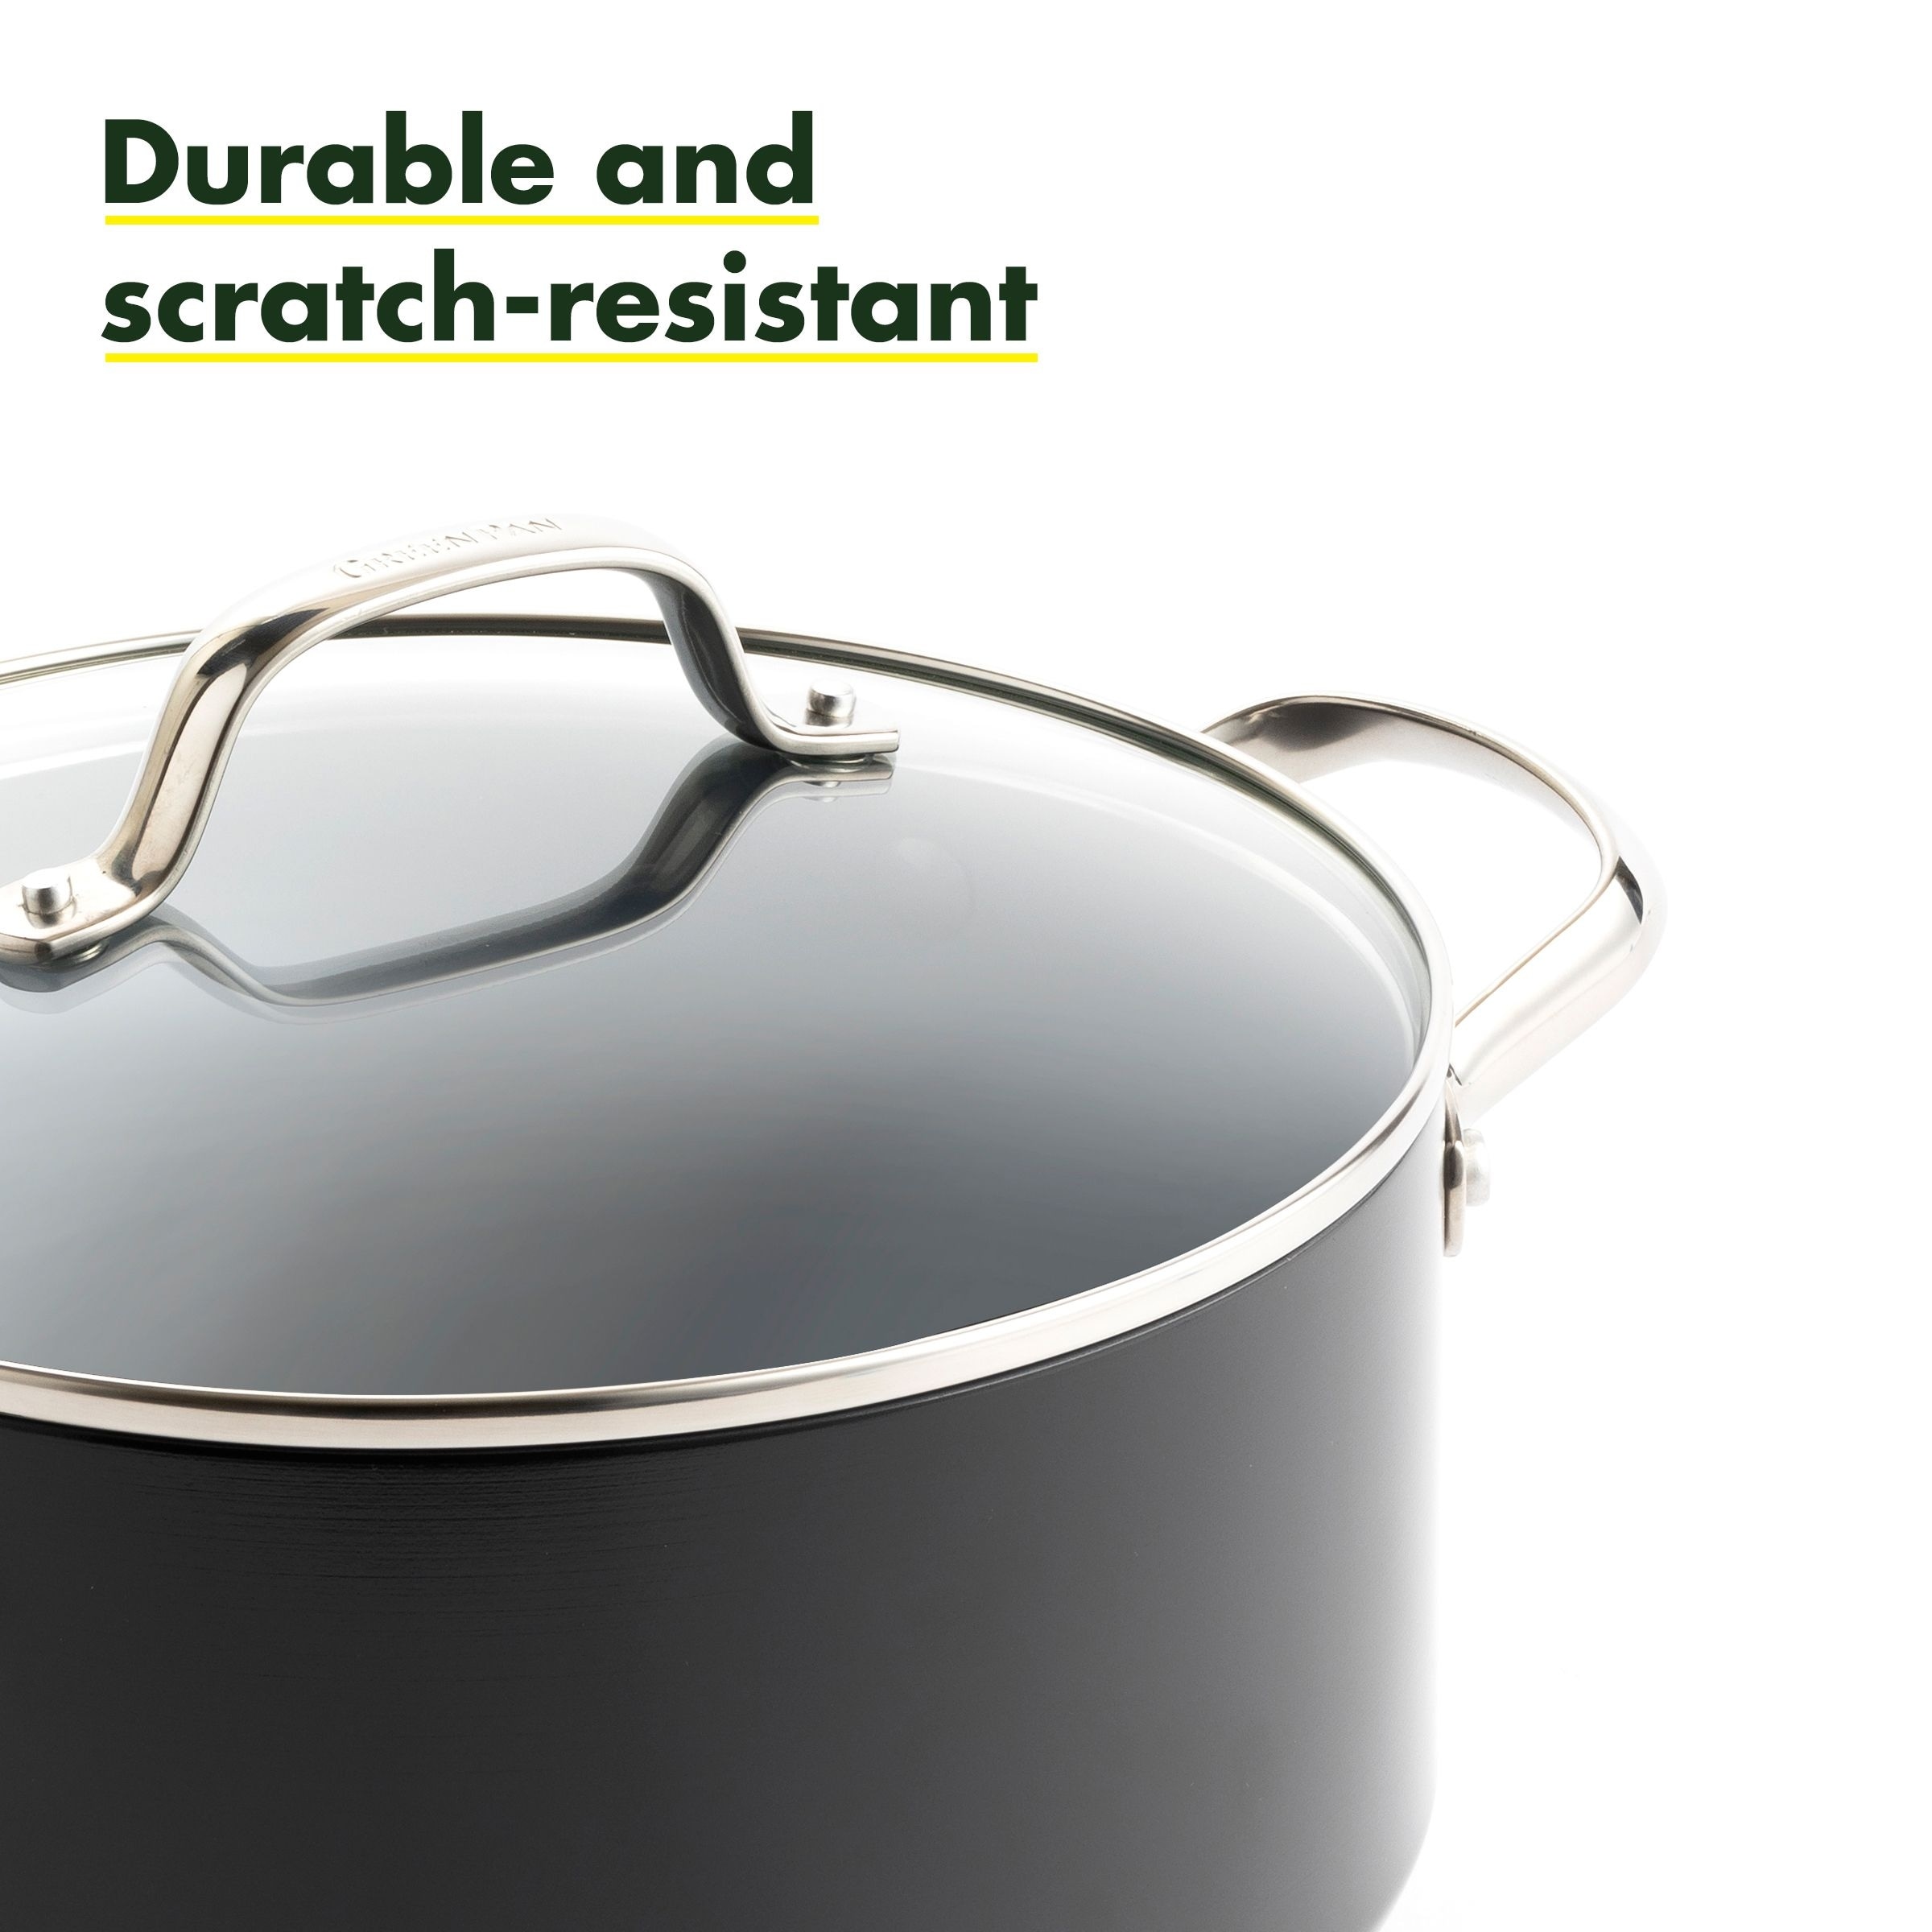 https://ak1.ostkcdn.com/images/products/is/images/direct/bb0cd18d3adce39585e2e837980b1da7992ed717/GreenPan-Valencia-Pro-Hard-Anodized-Induction-Safe-Healthy-Ceramic-Nonstick-Gray-Casserole-with-Lid%2C-5QT.jpg